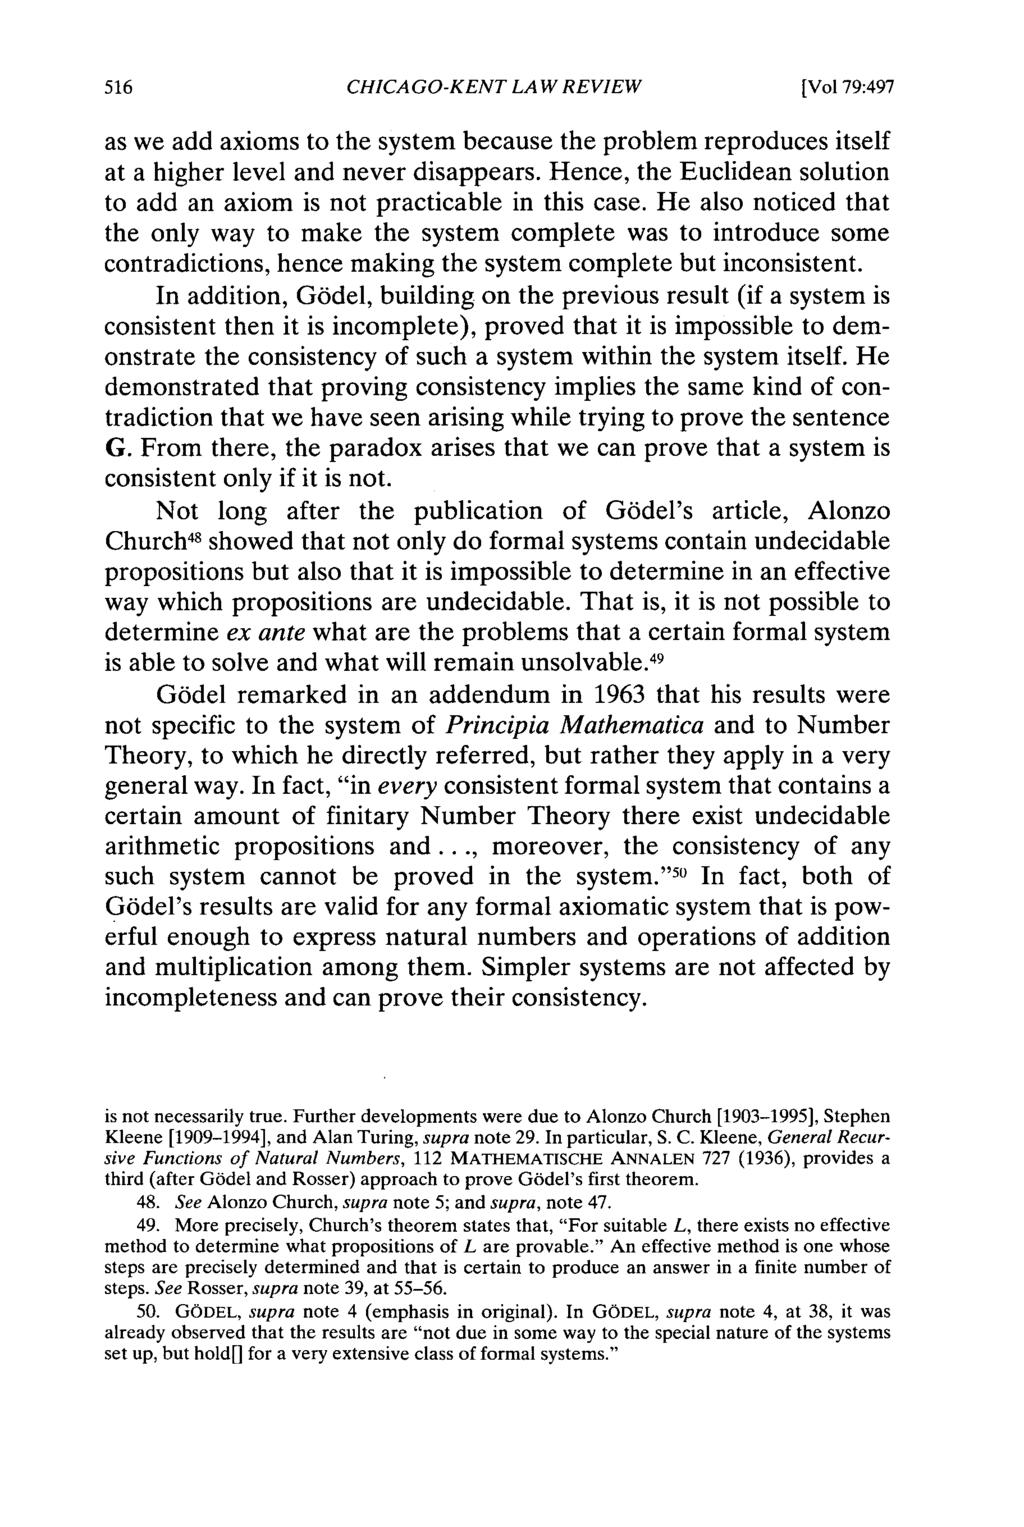 CHICAGO-KENT LAW REVIEW [Vol 79:497 as we add axioms to the system because the problem reproduces itself at a higher level and never disappears.